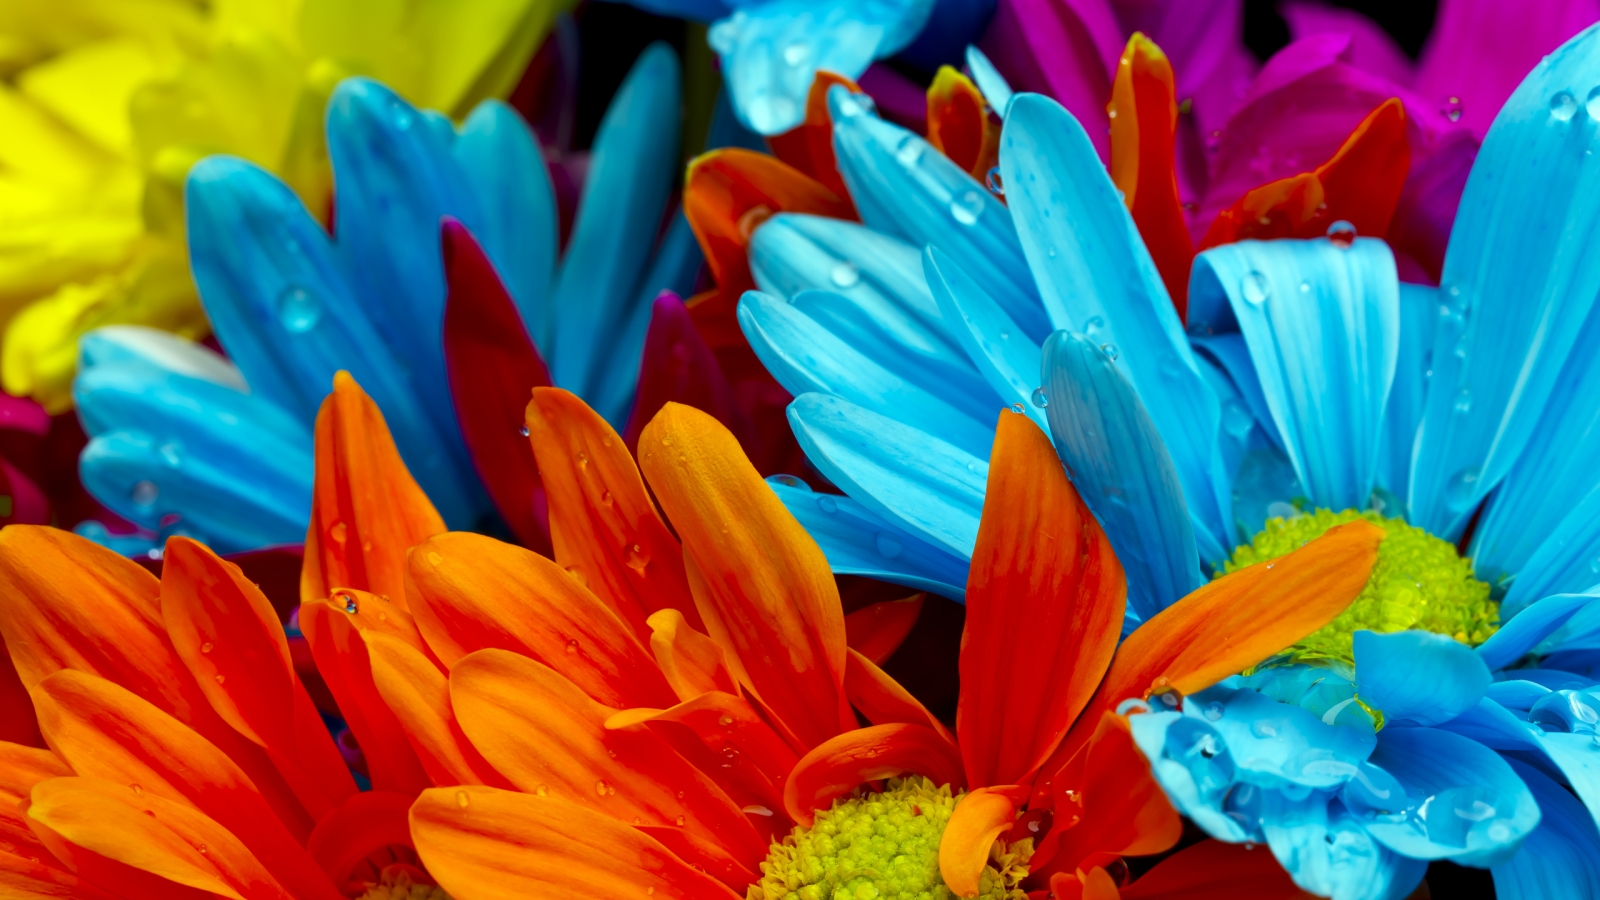 Amazing Flower Colors for 1600 x 900 HDTV resolution